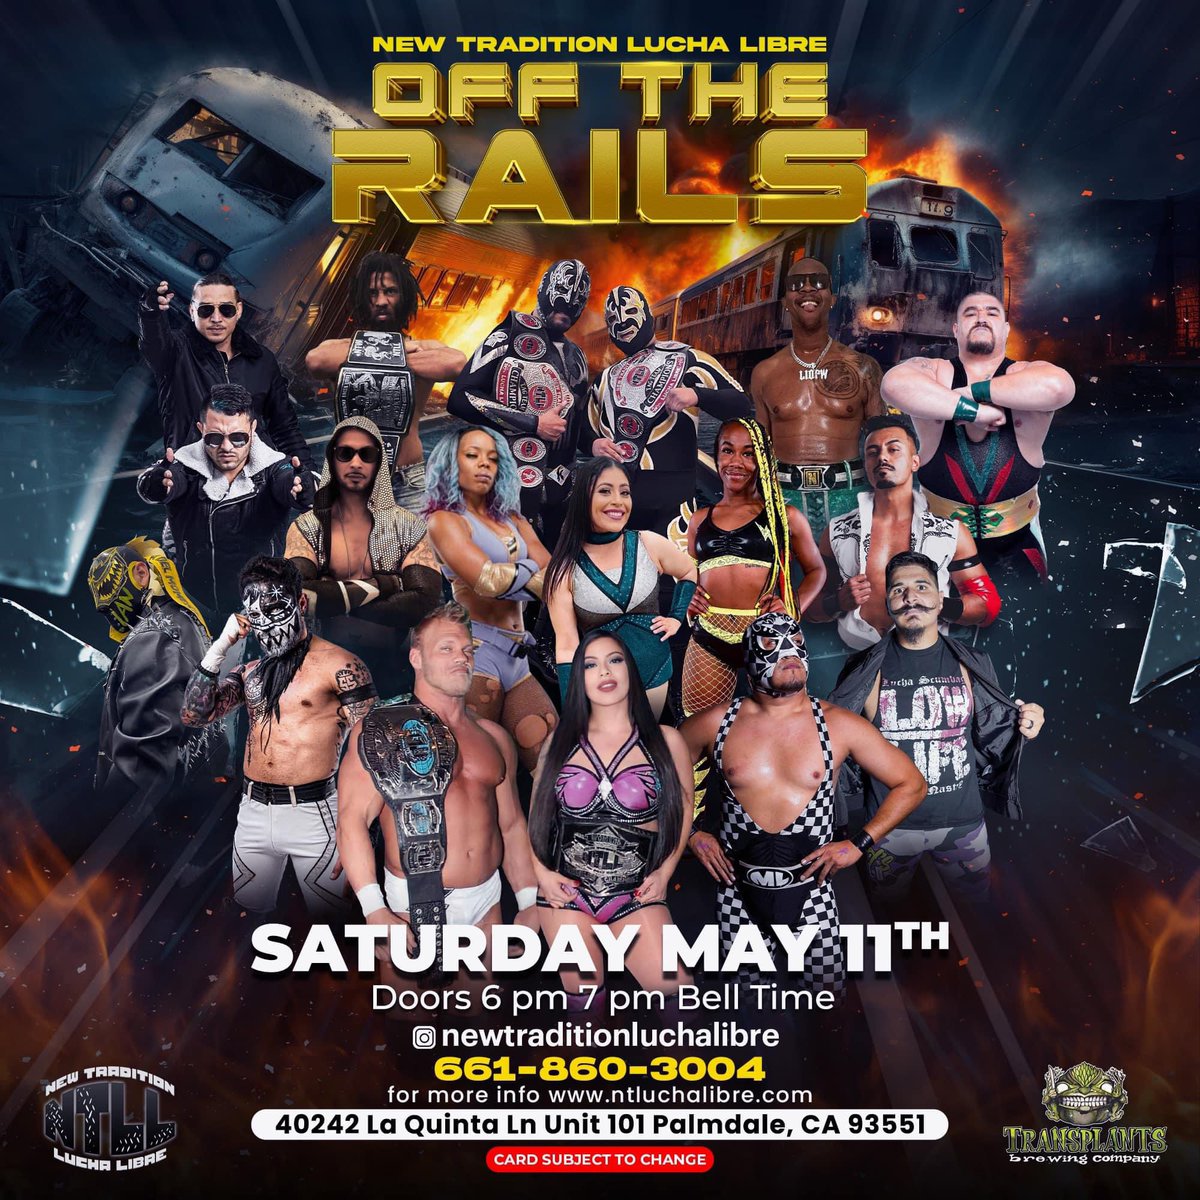 You don’t wanna miss this wrestling event on May 11 with the promotion @ntluchalibre 

#Prowrestling

#IndependentWrestling

#SoCalWrestling

#LuchaLibre

#Wrestling

#WWE

#AEW

#RingOfHonor

#LuchaLibreaaa

#westcoastprowrestling

#TNAWrestling